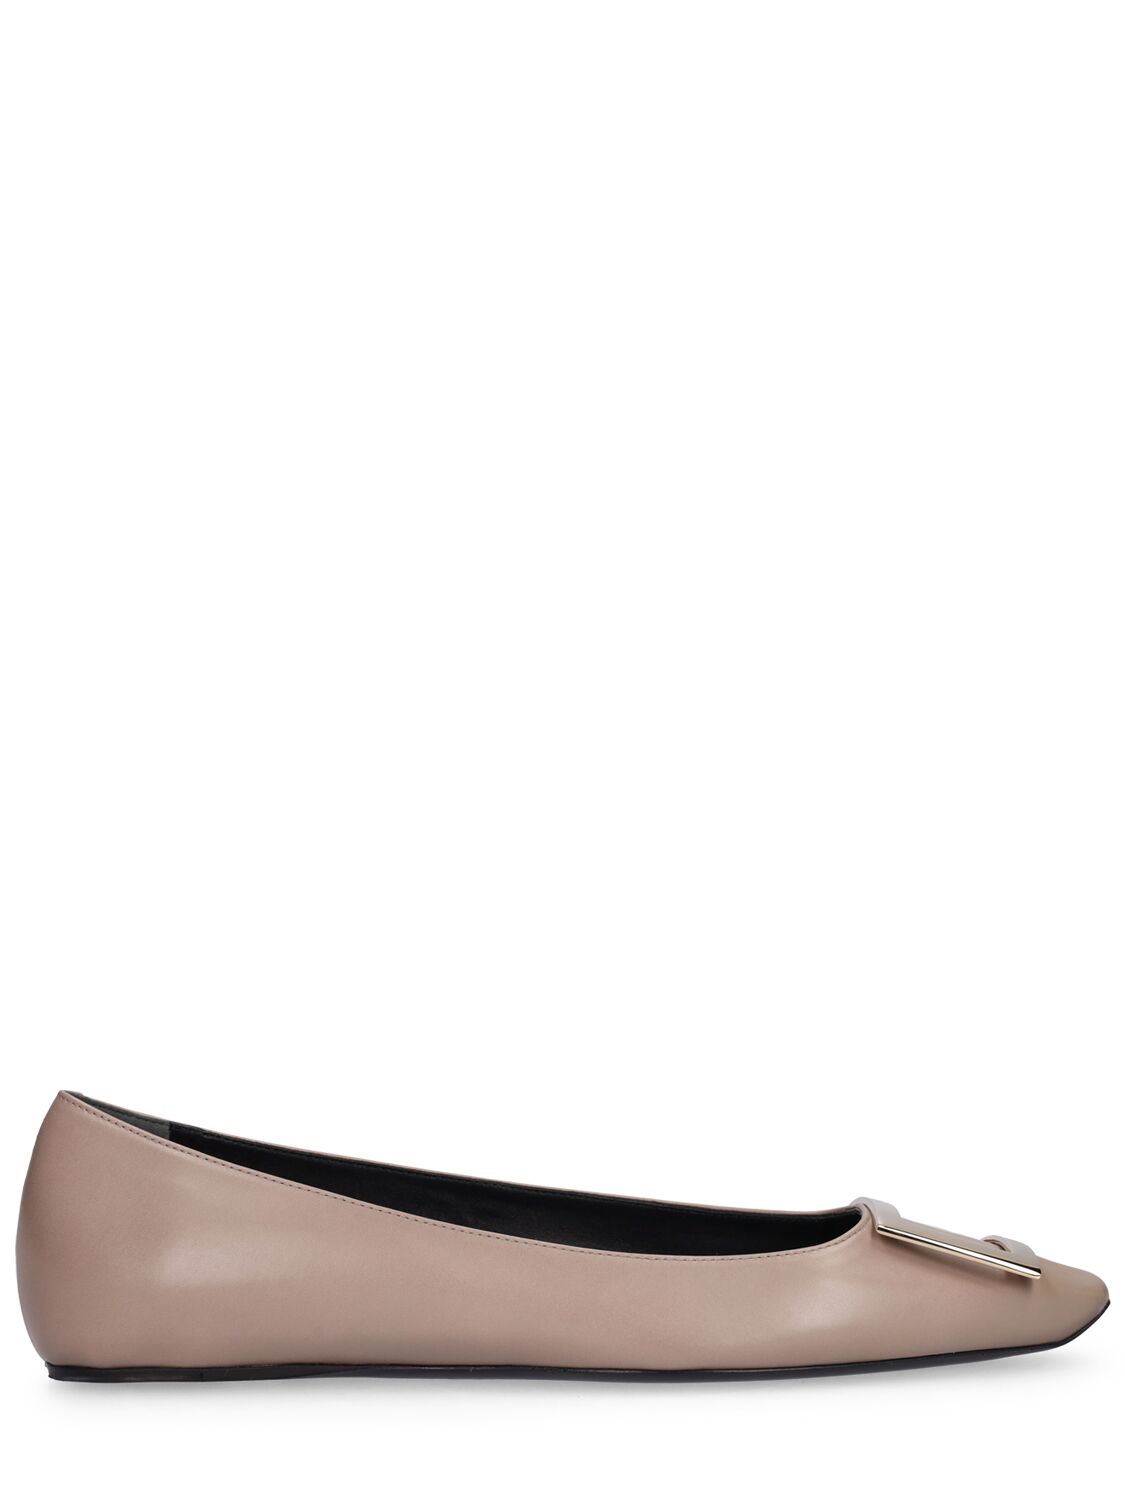 Roger Vivier 5mm Trompette Leather Flats In Taupe